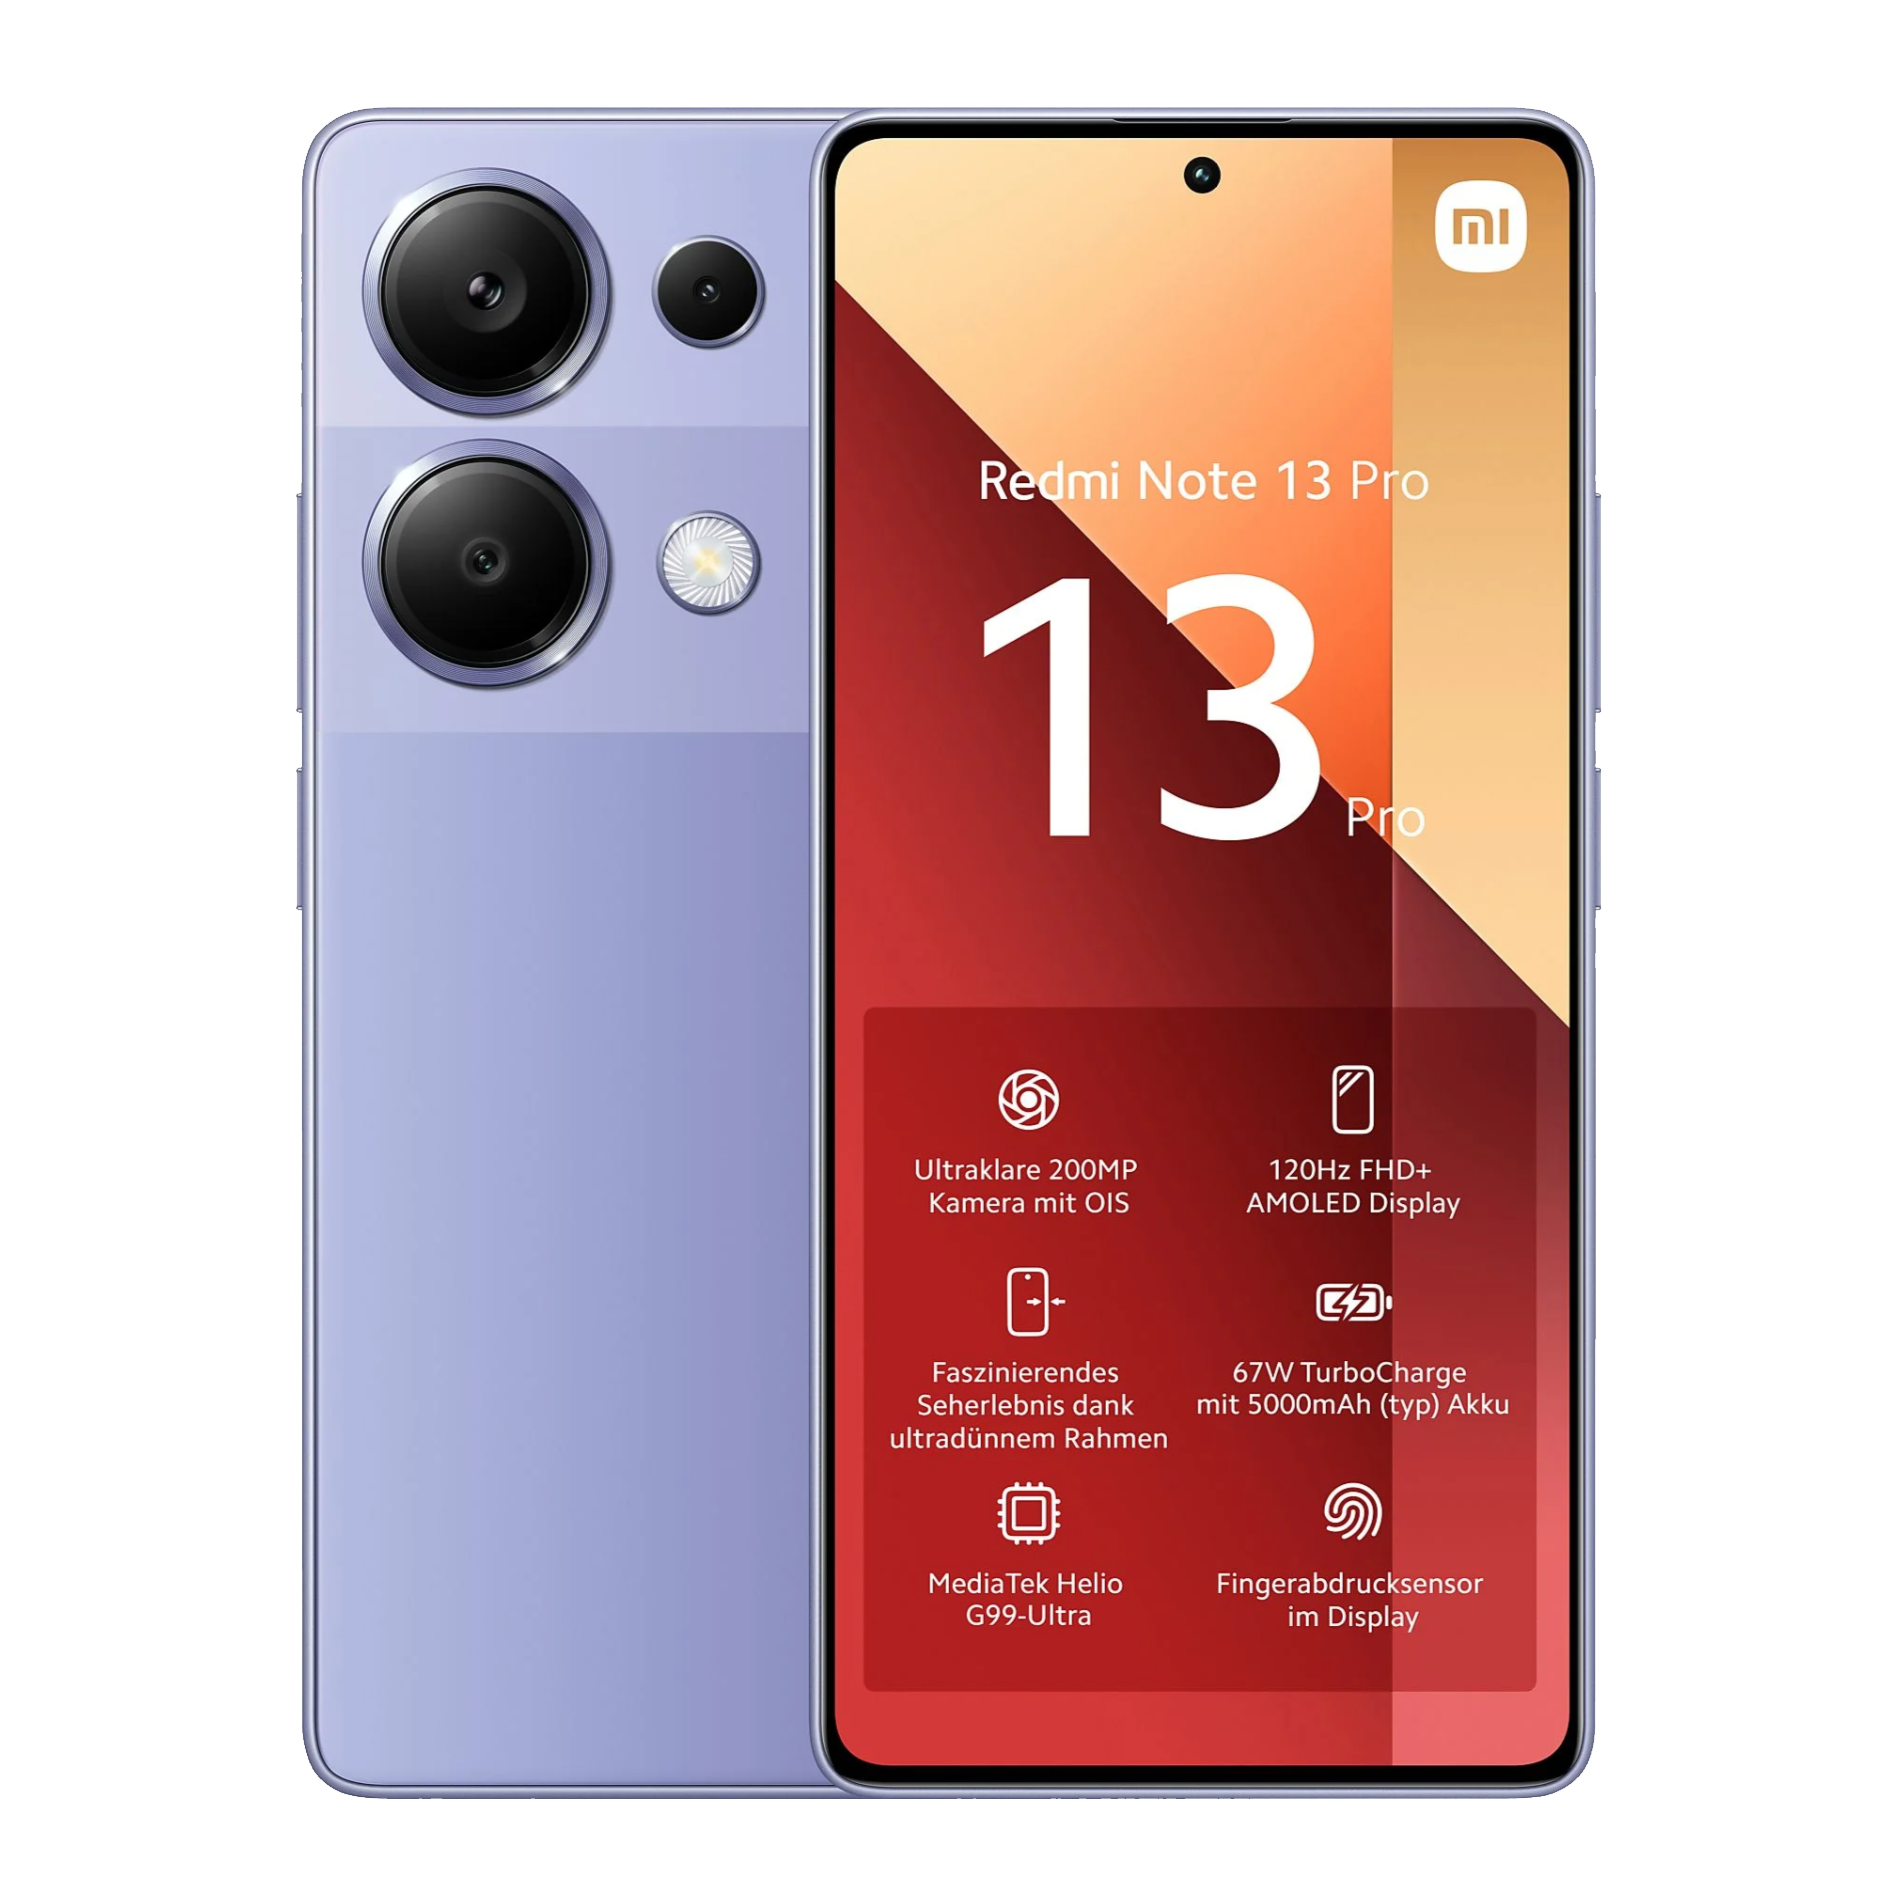 Redmi Note 13 Pro+: It's All About the Competition! 